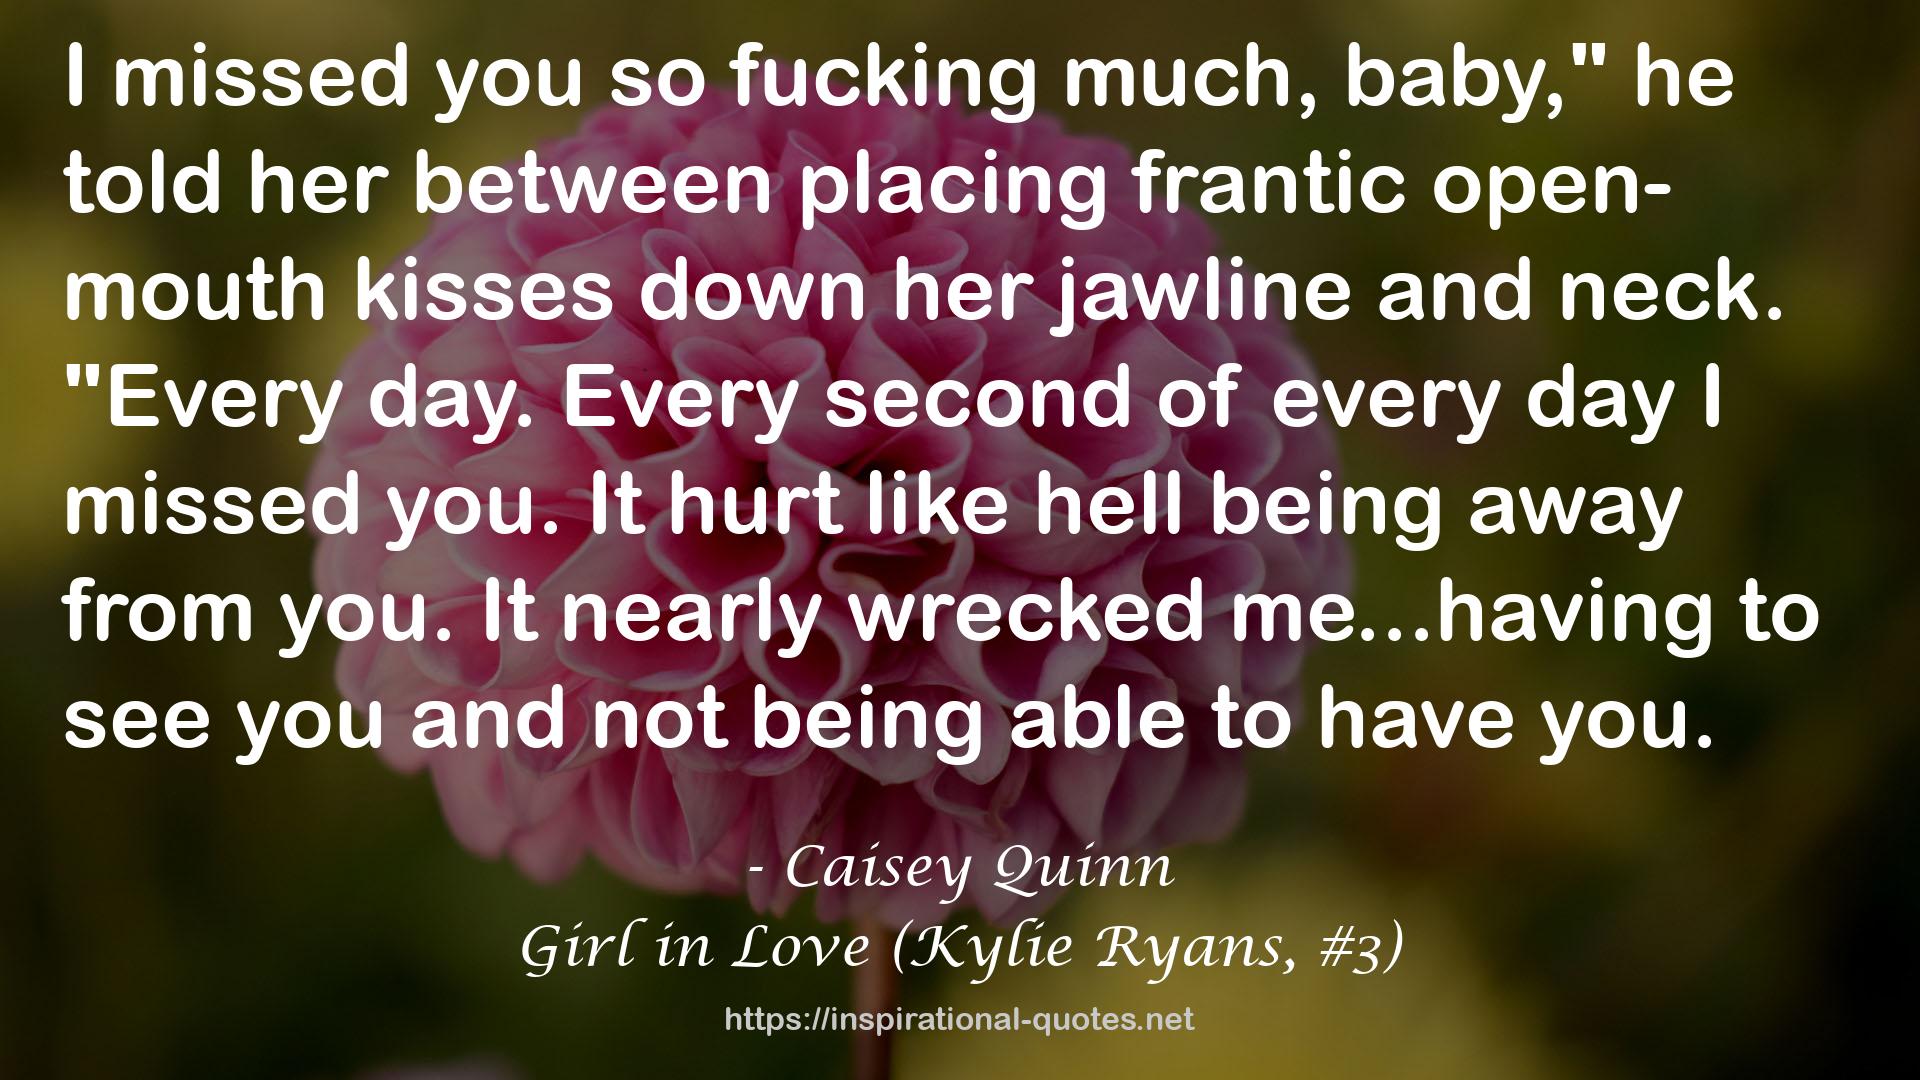 Girl in Love (Kylie Ryans, #3) QUOTES